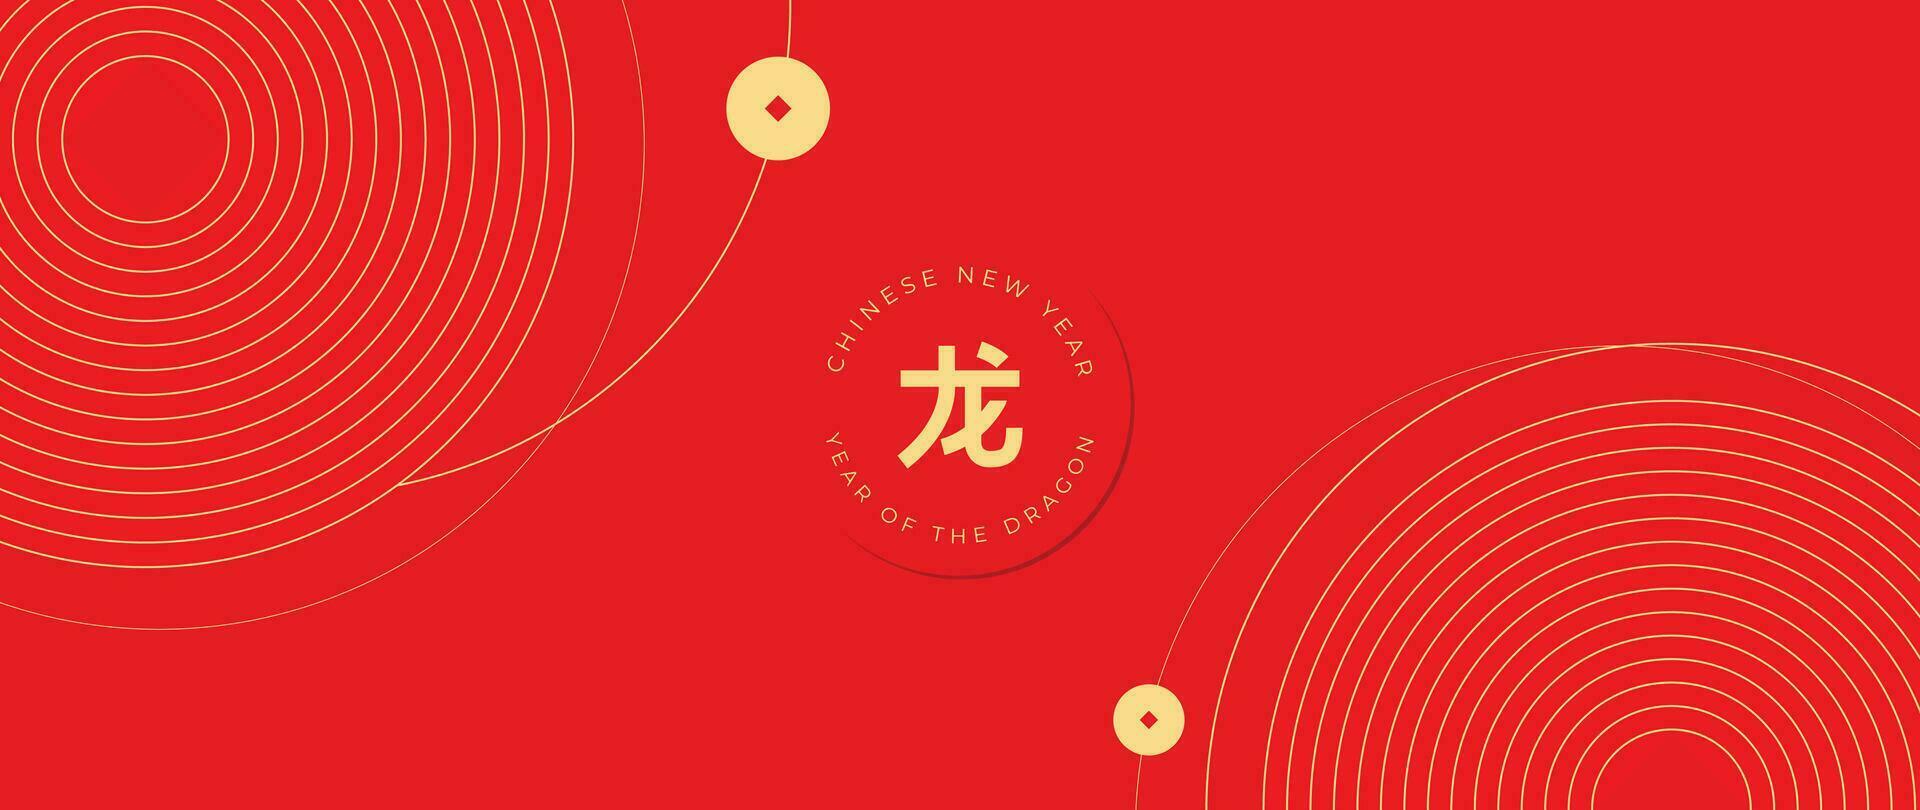 Happy Chinese New Year luxury style background vector. Golden geometric shapes, circles, line art, coins on red wallpaper. Minimal oriental design for backdrop, card, poster, advertising. vector